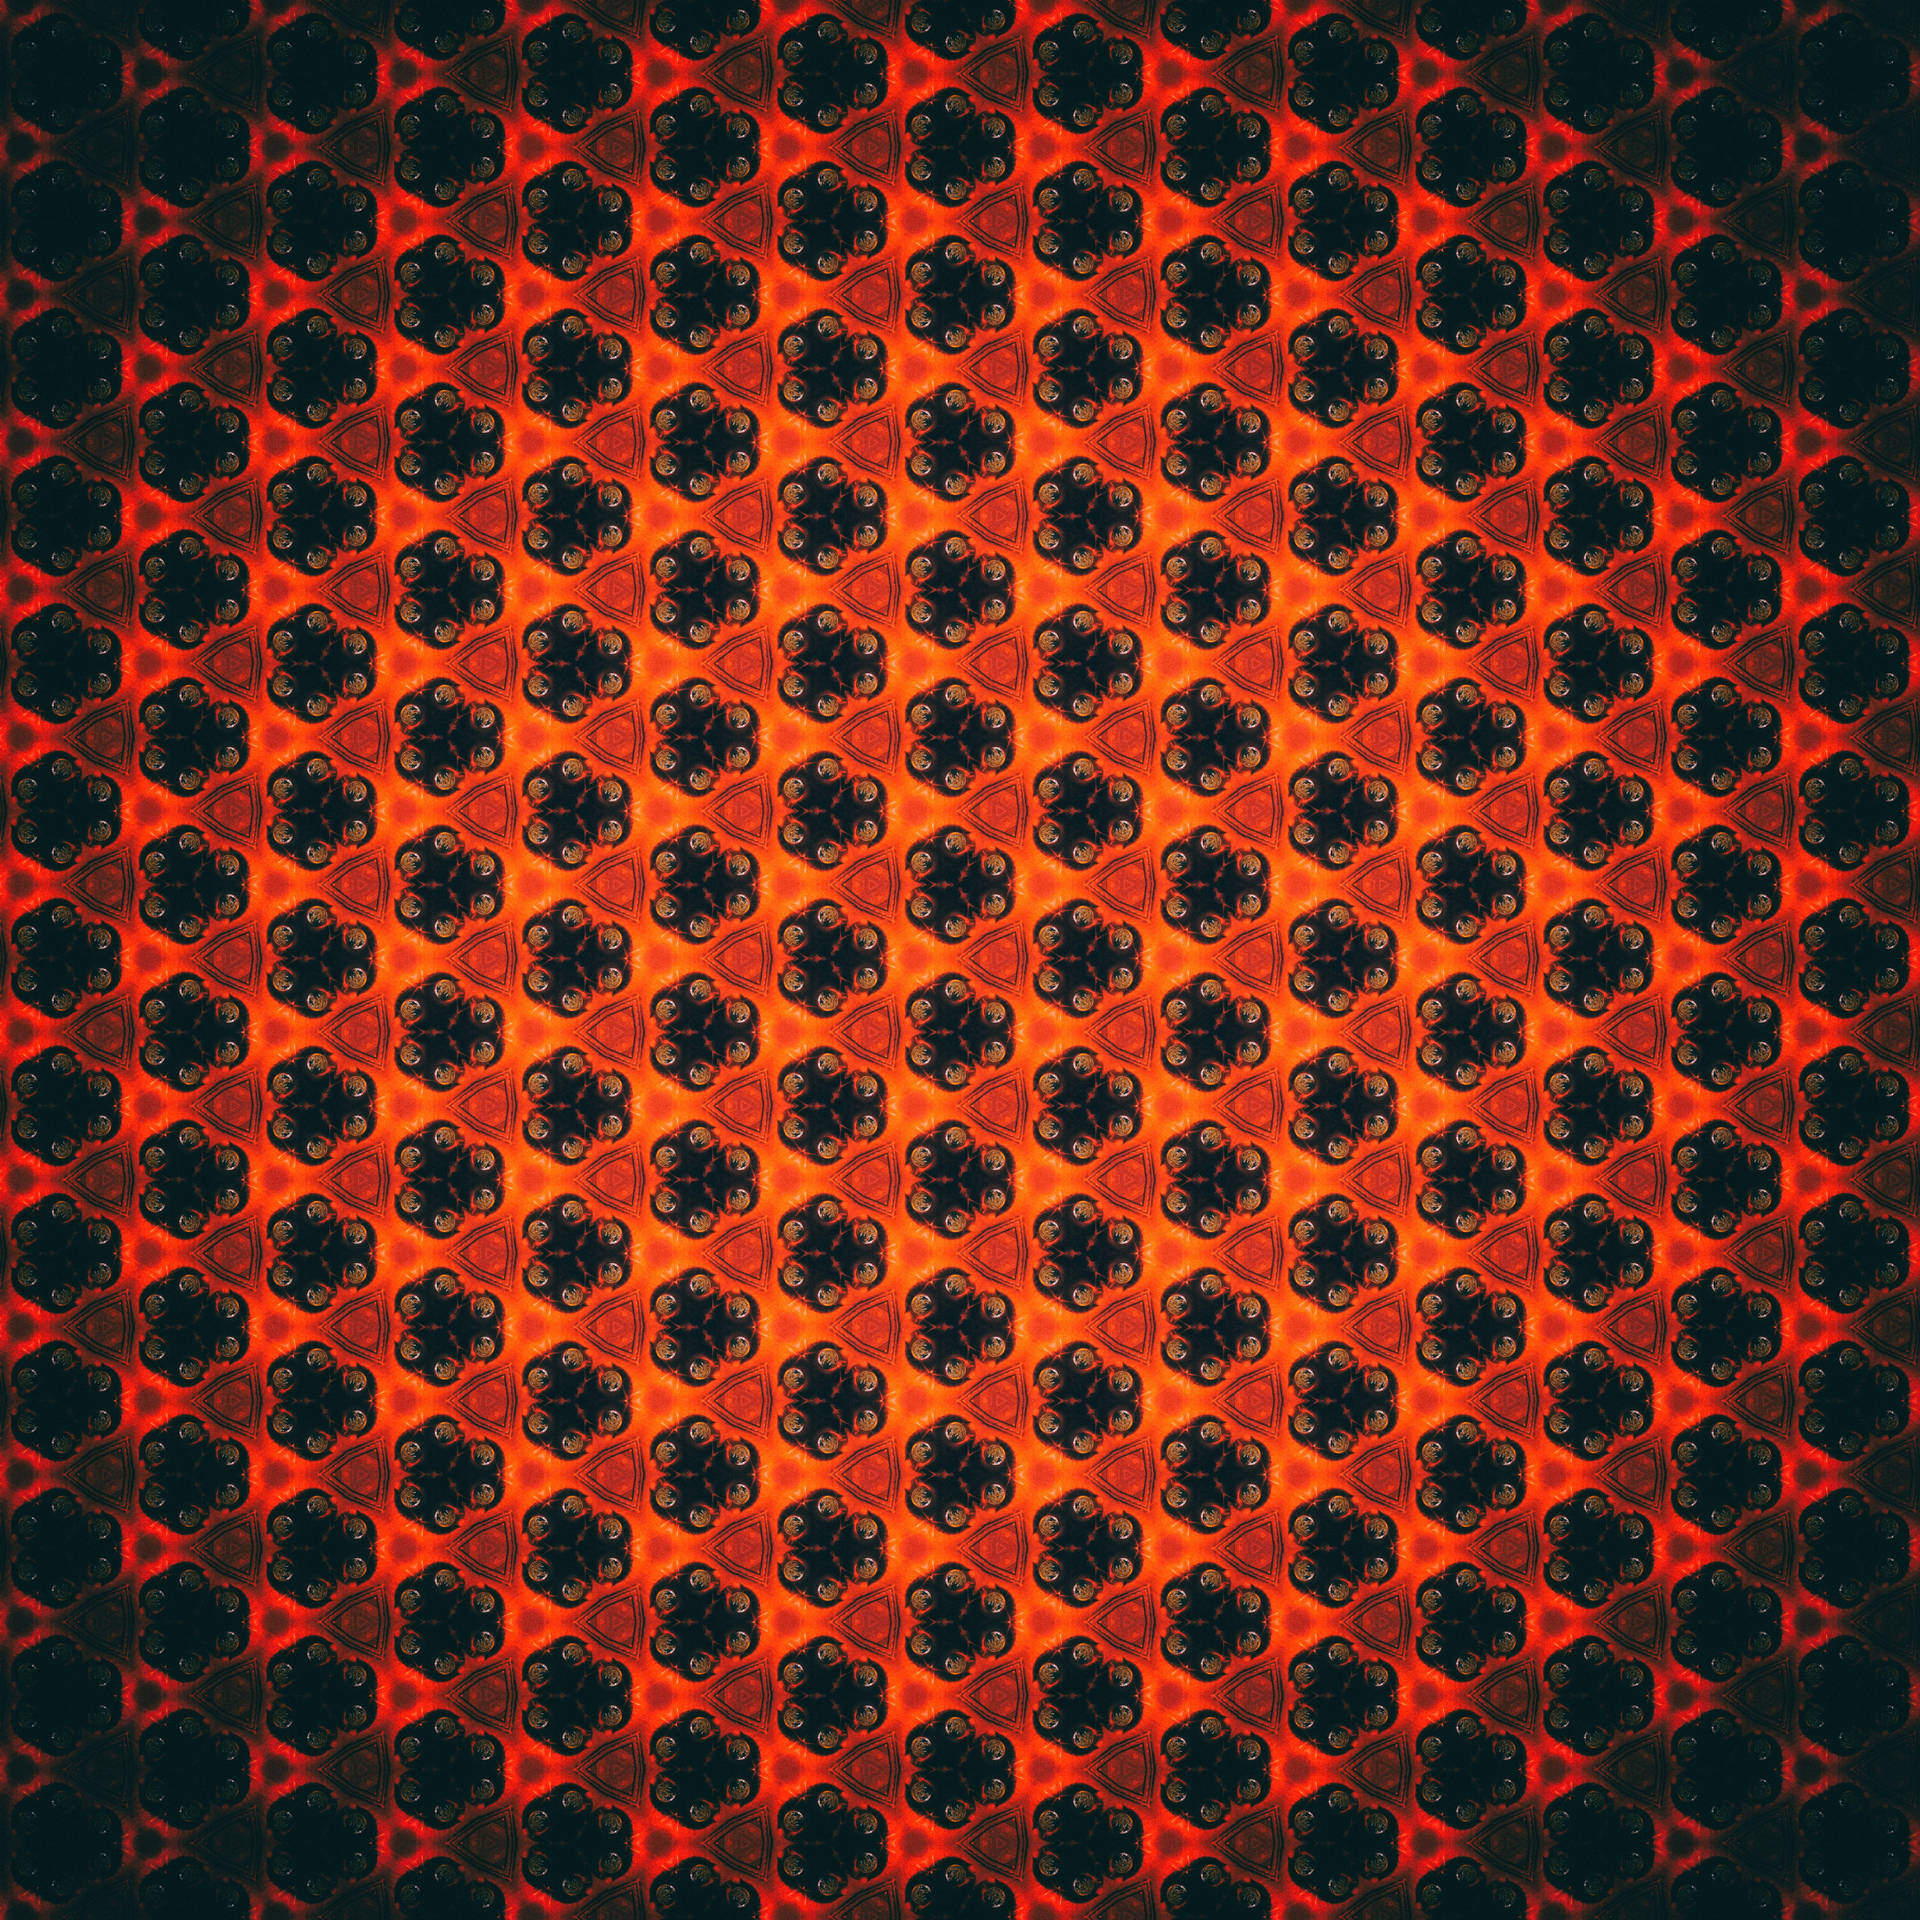 Pattern 5000X5000 Wallpaper and Background Image